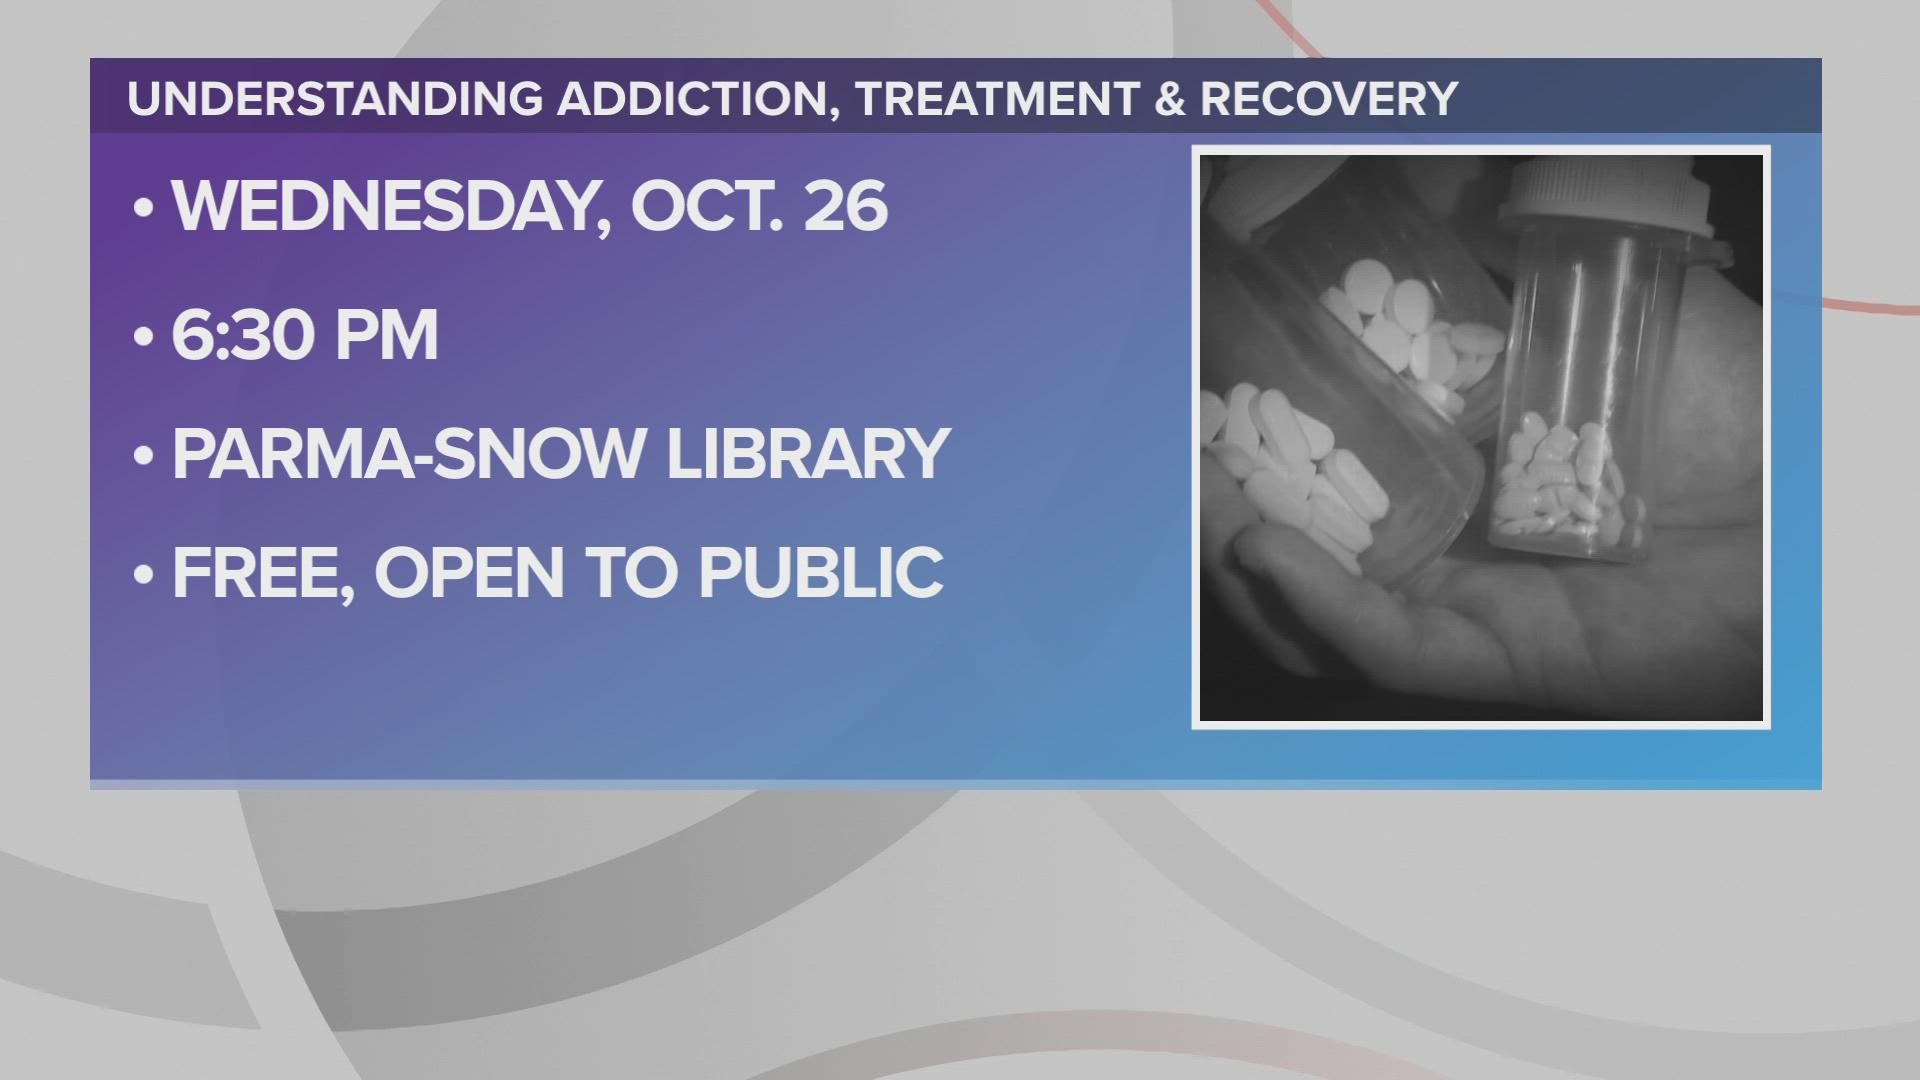 The free event will be held on Wednesday, October 26th at Parma-Snow Library in Parma starting at 6:30 p.m.